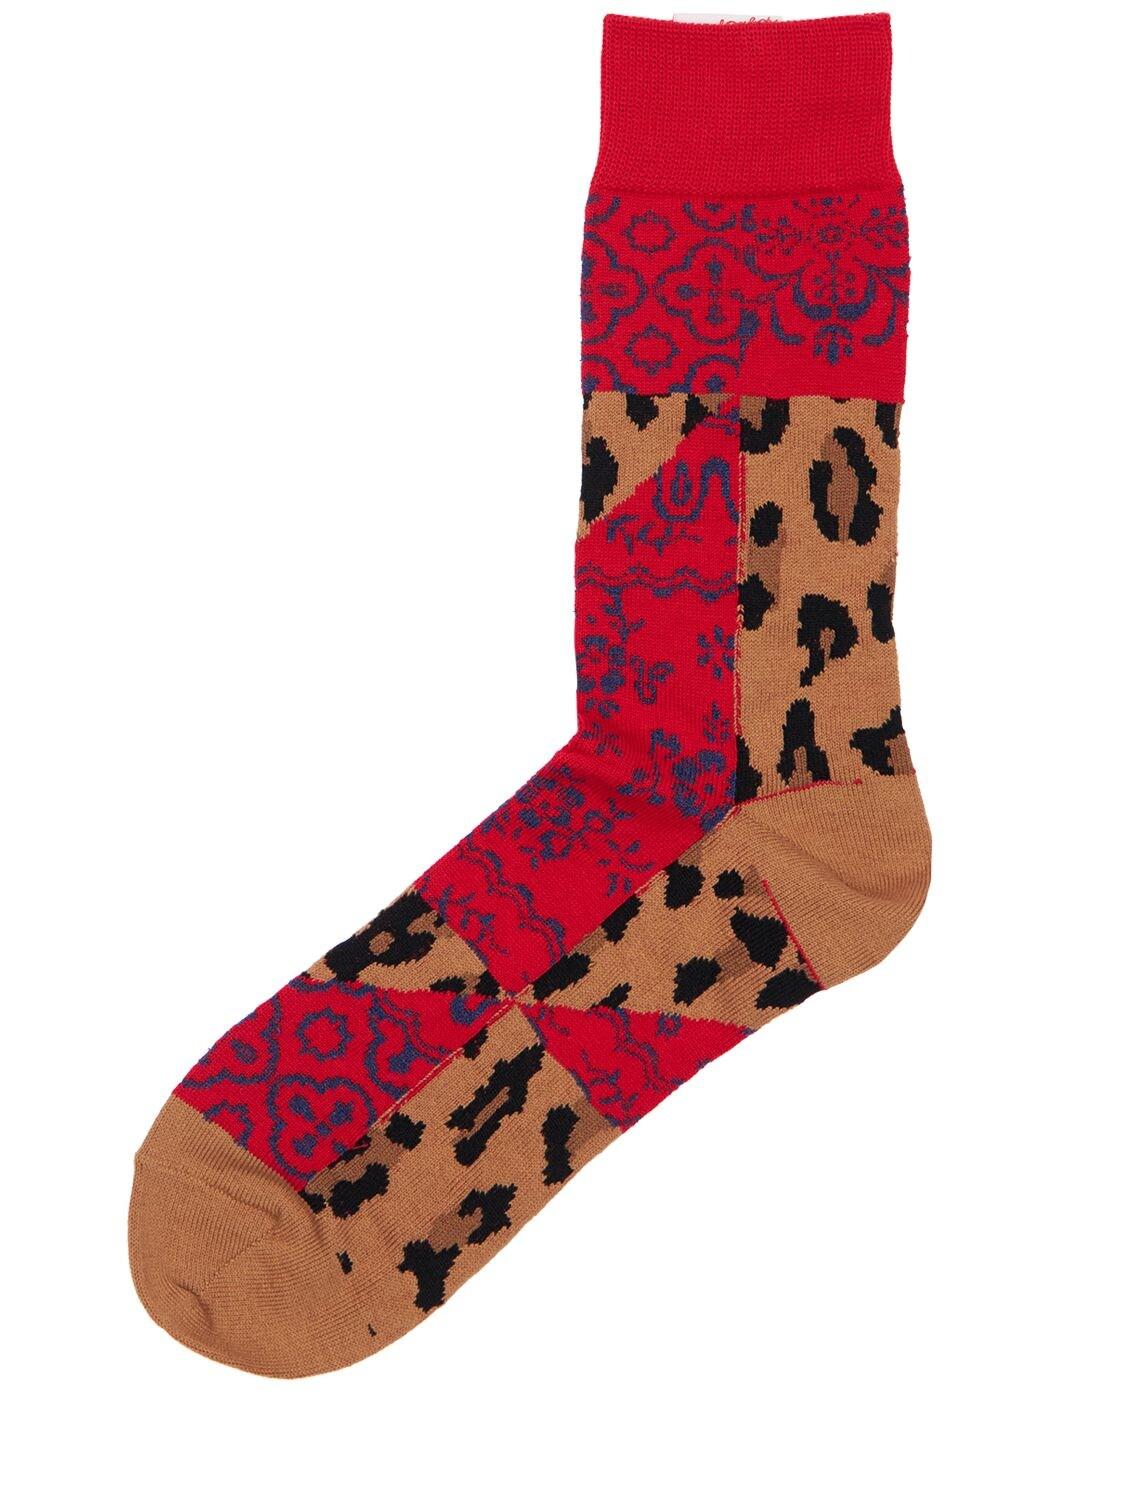 Sacai Animalier Print Cotton Blend Socks in Red/Beige (Red) for Men - Lyst